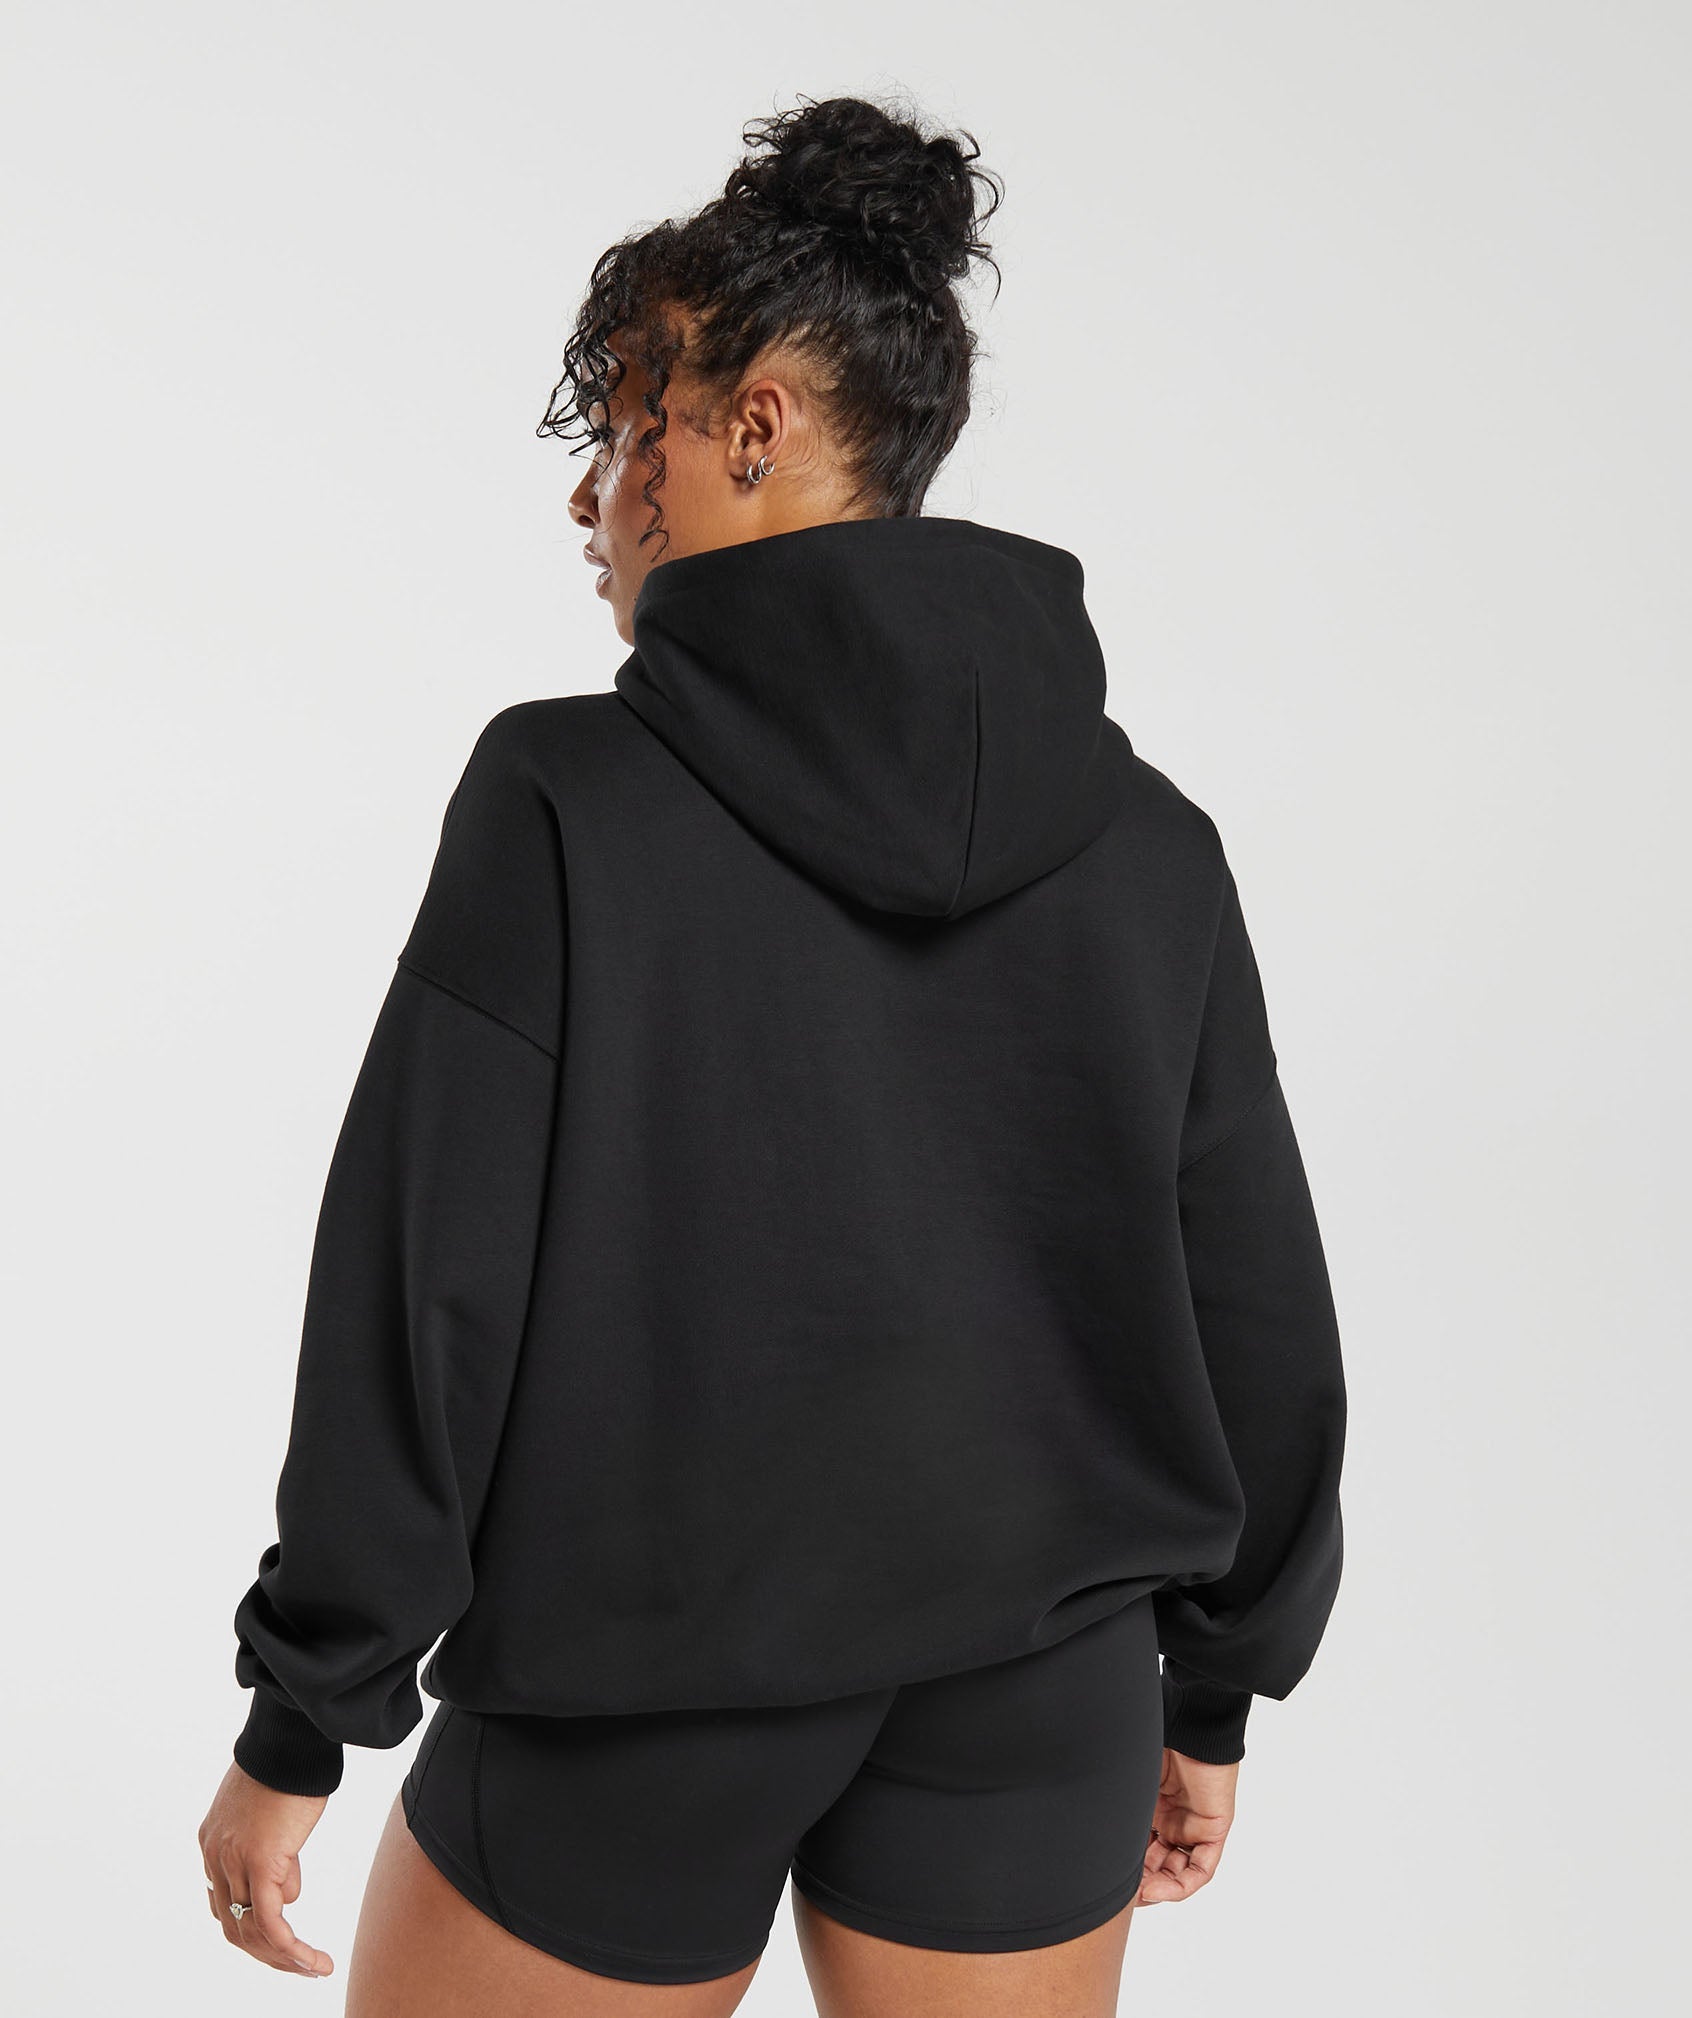 Strength Department Graphic Hoodie in Black - view 2